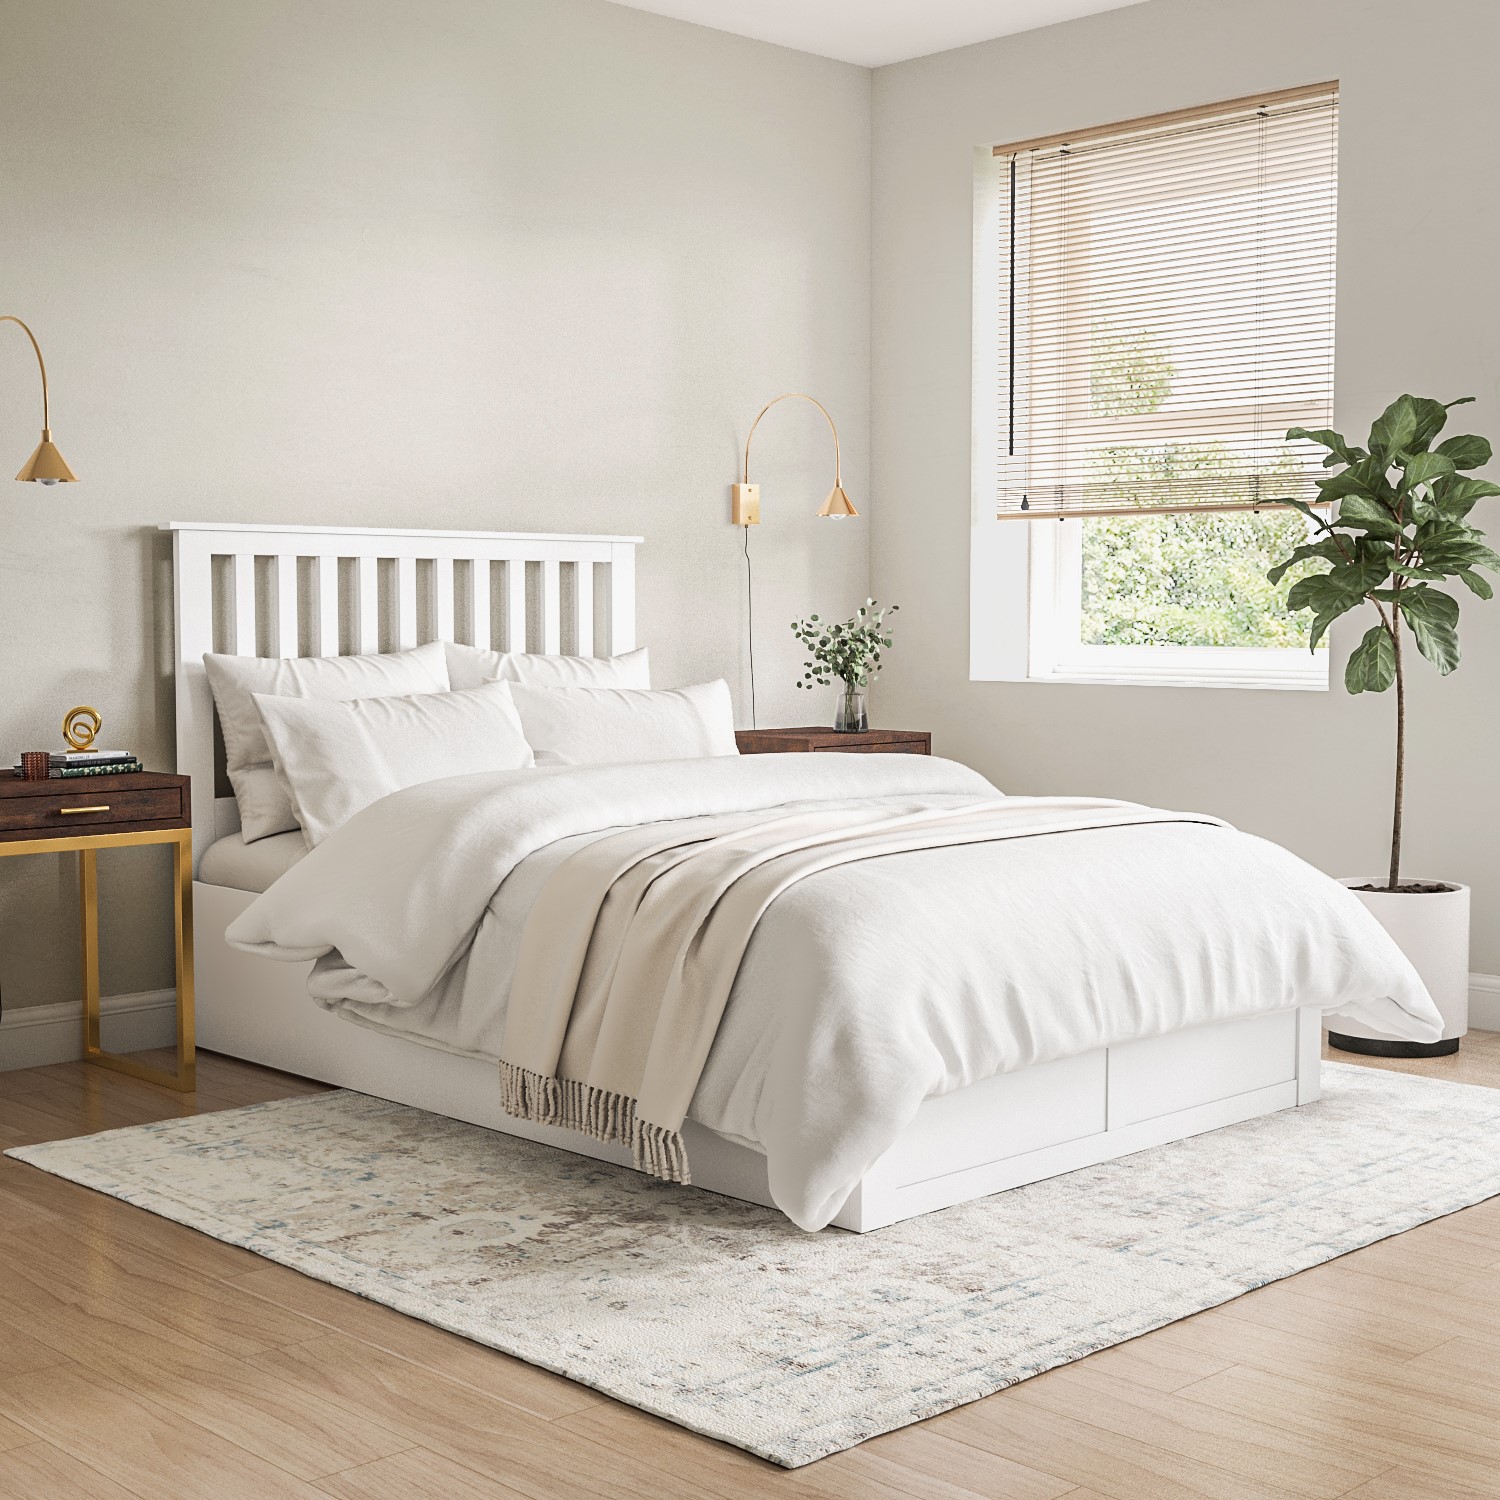 Photo of White wooden double ottoman bed - anderson